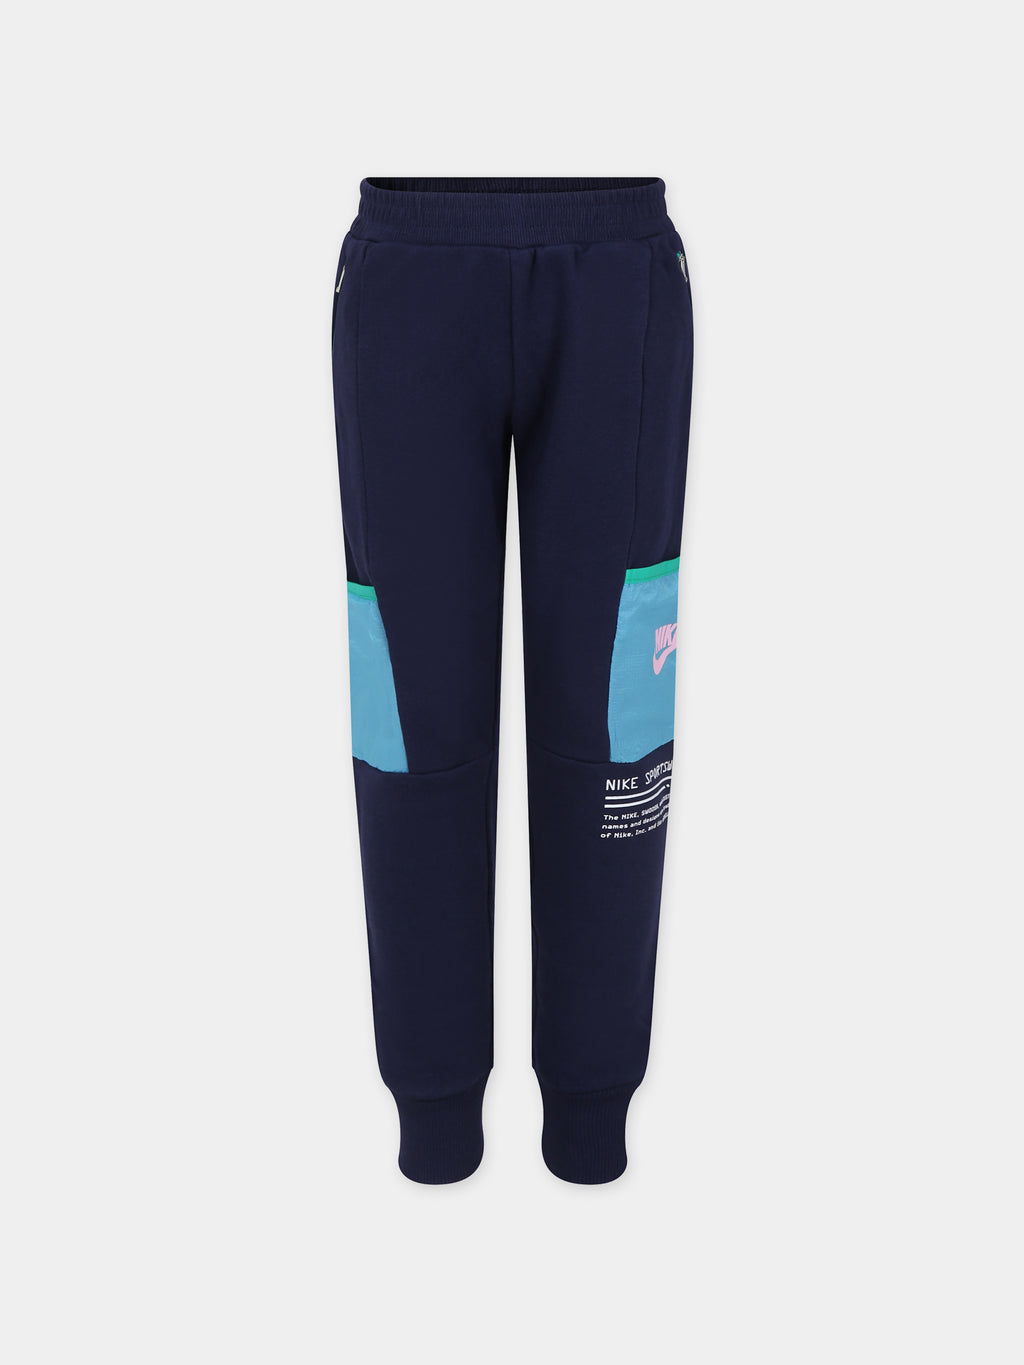 Blue trousers for boy with logo and swoosh